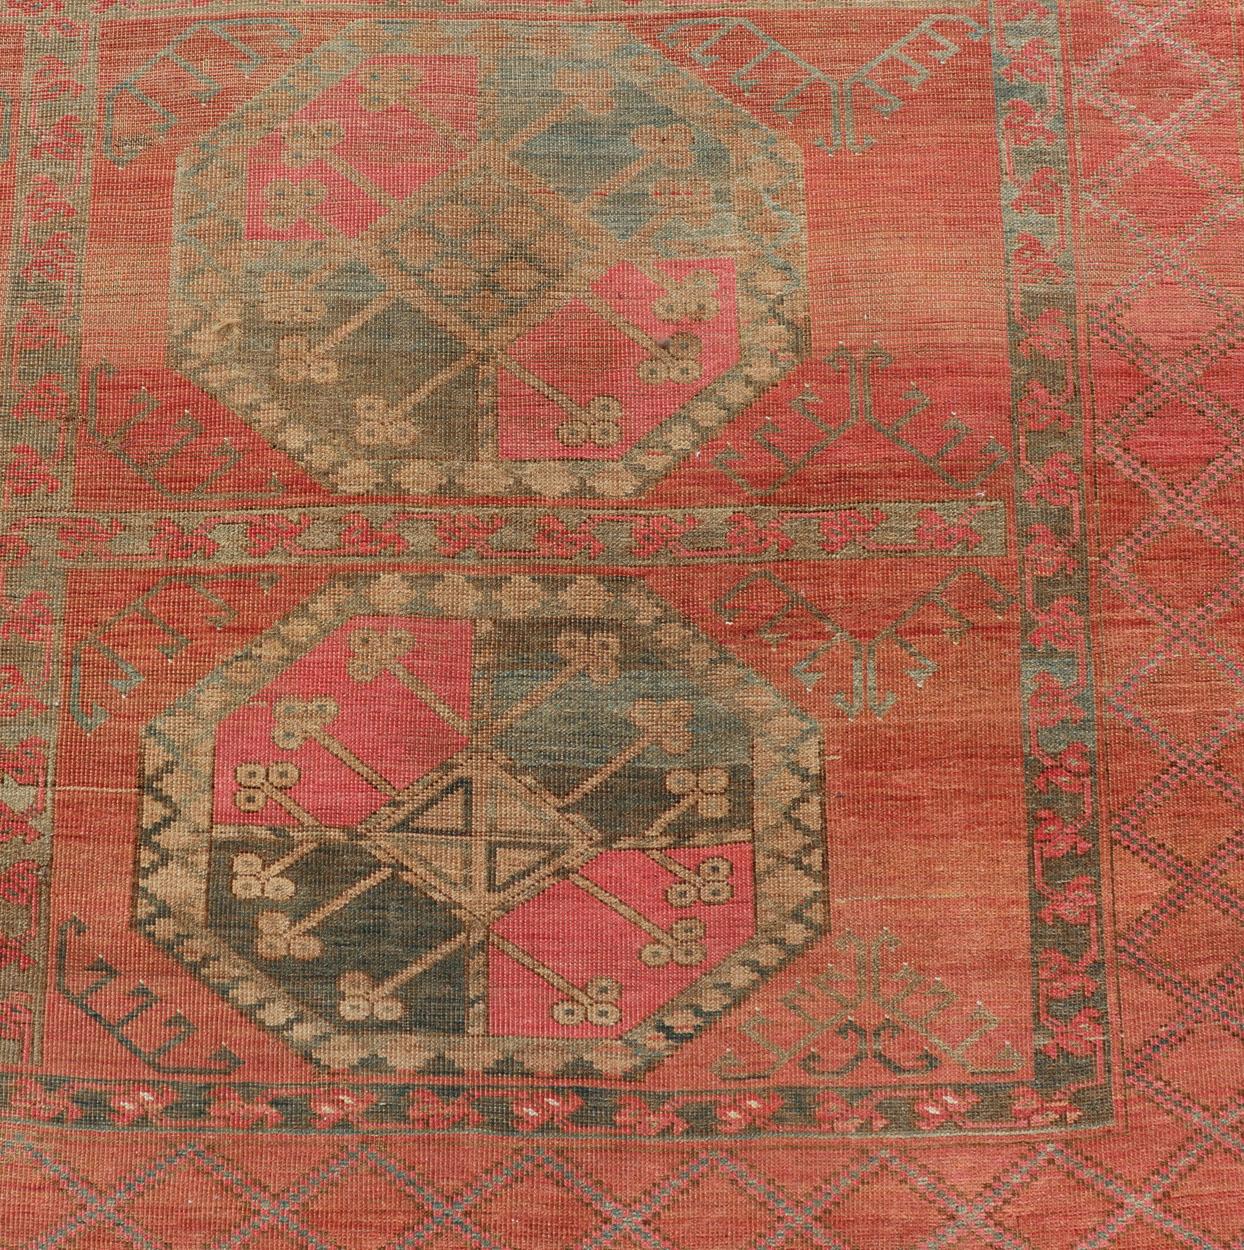 Hand-Knotted Large Turkomen Ersari Rug with All-Over Gul Design in Tan, Coral, and Brown For Sale